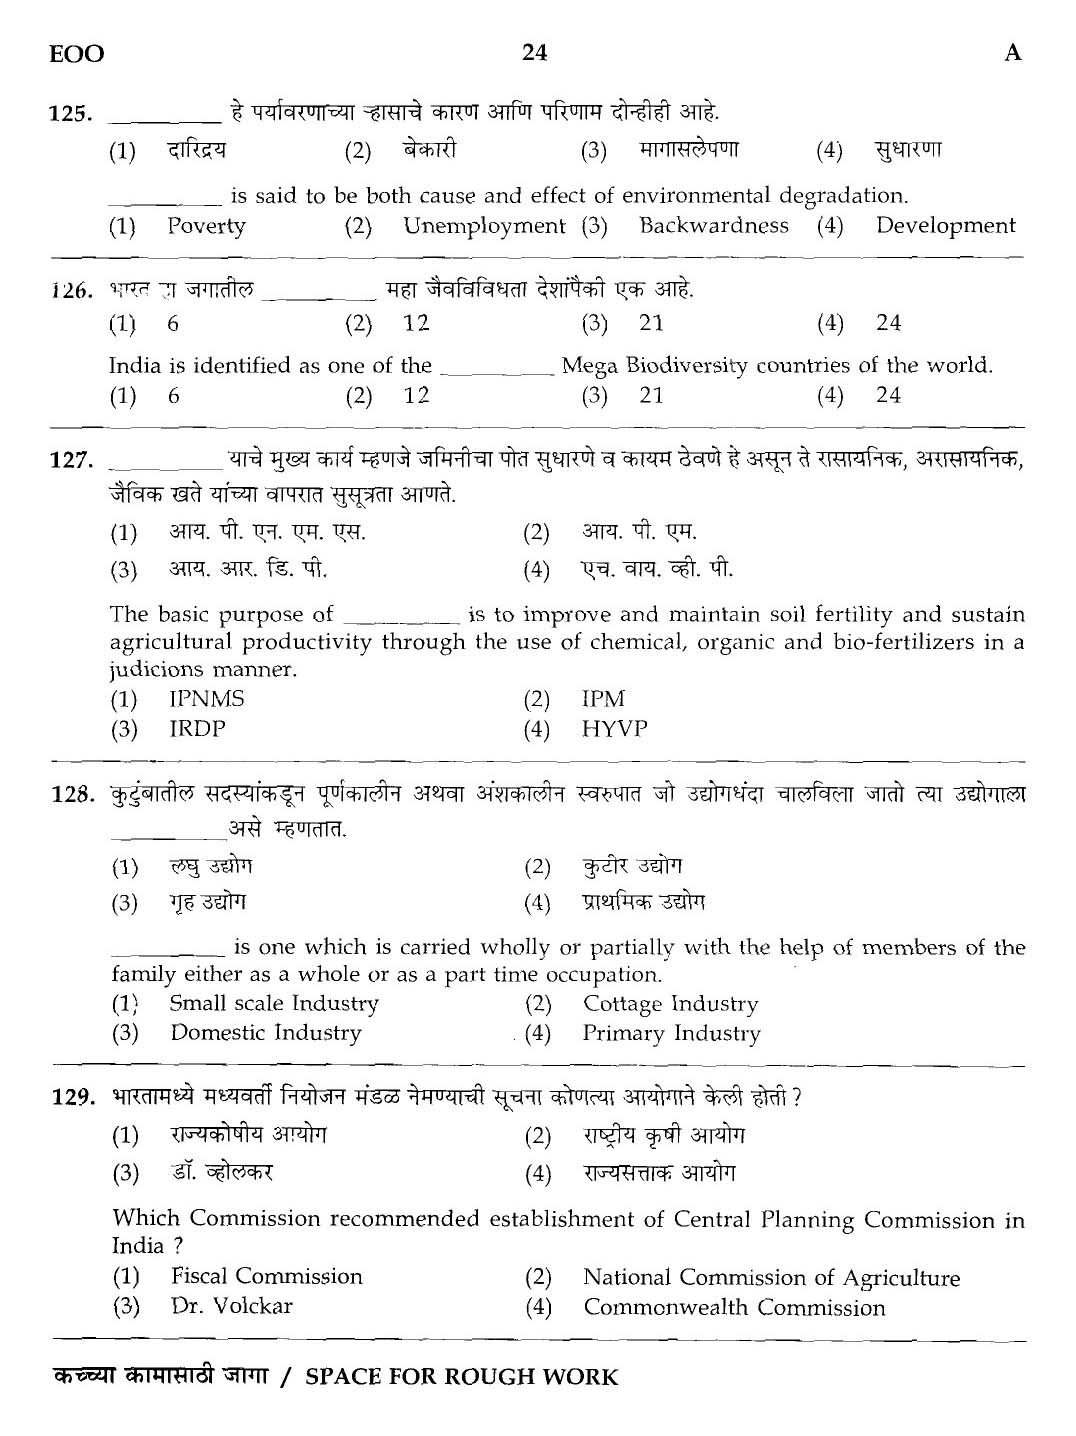 MPSC Agricultural Services Preliminary Exam 2012 Question Paper 23